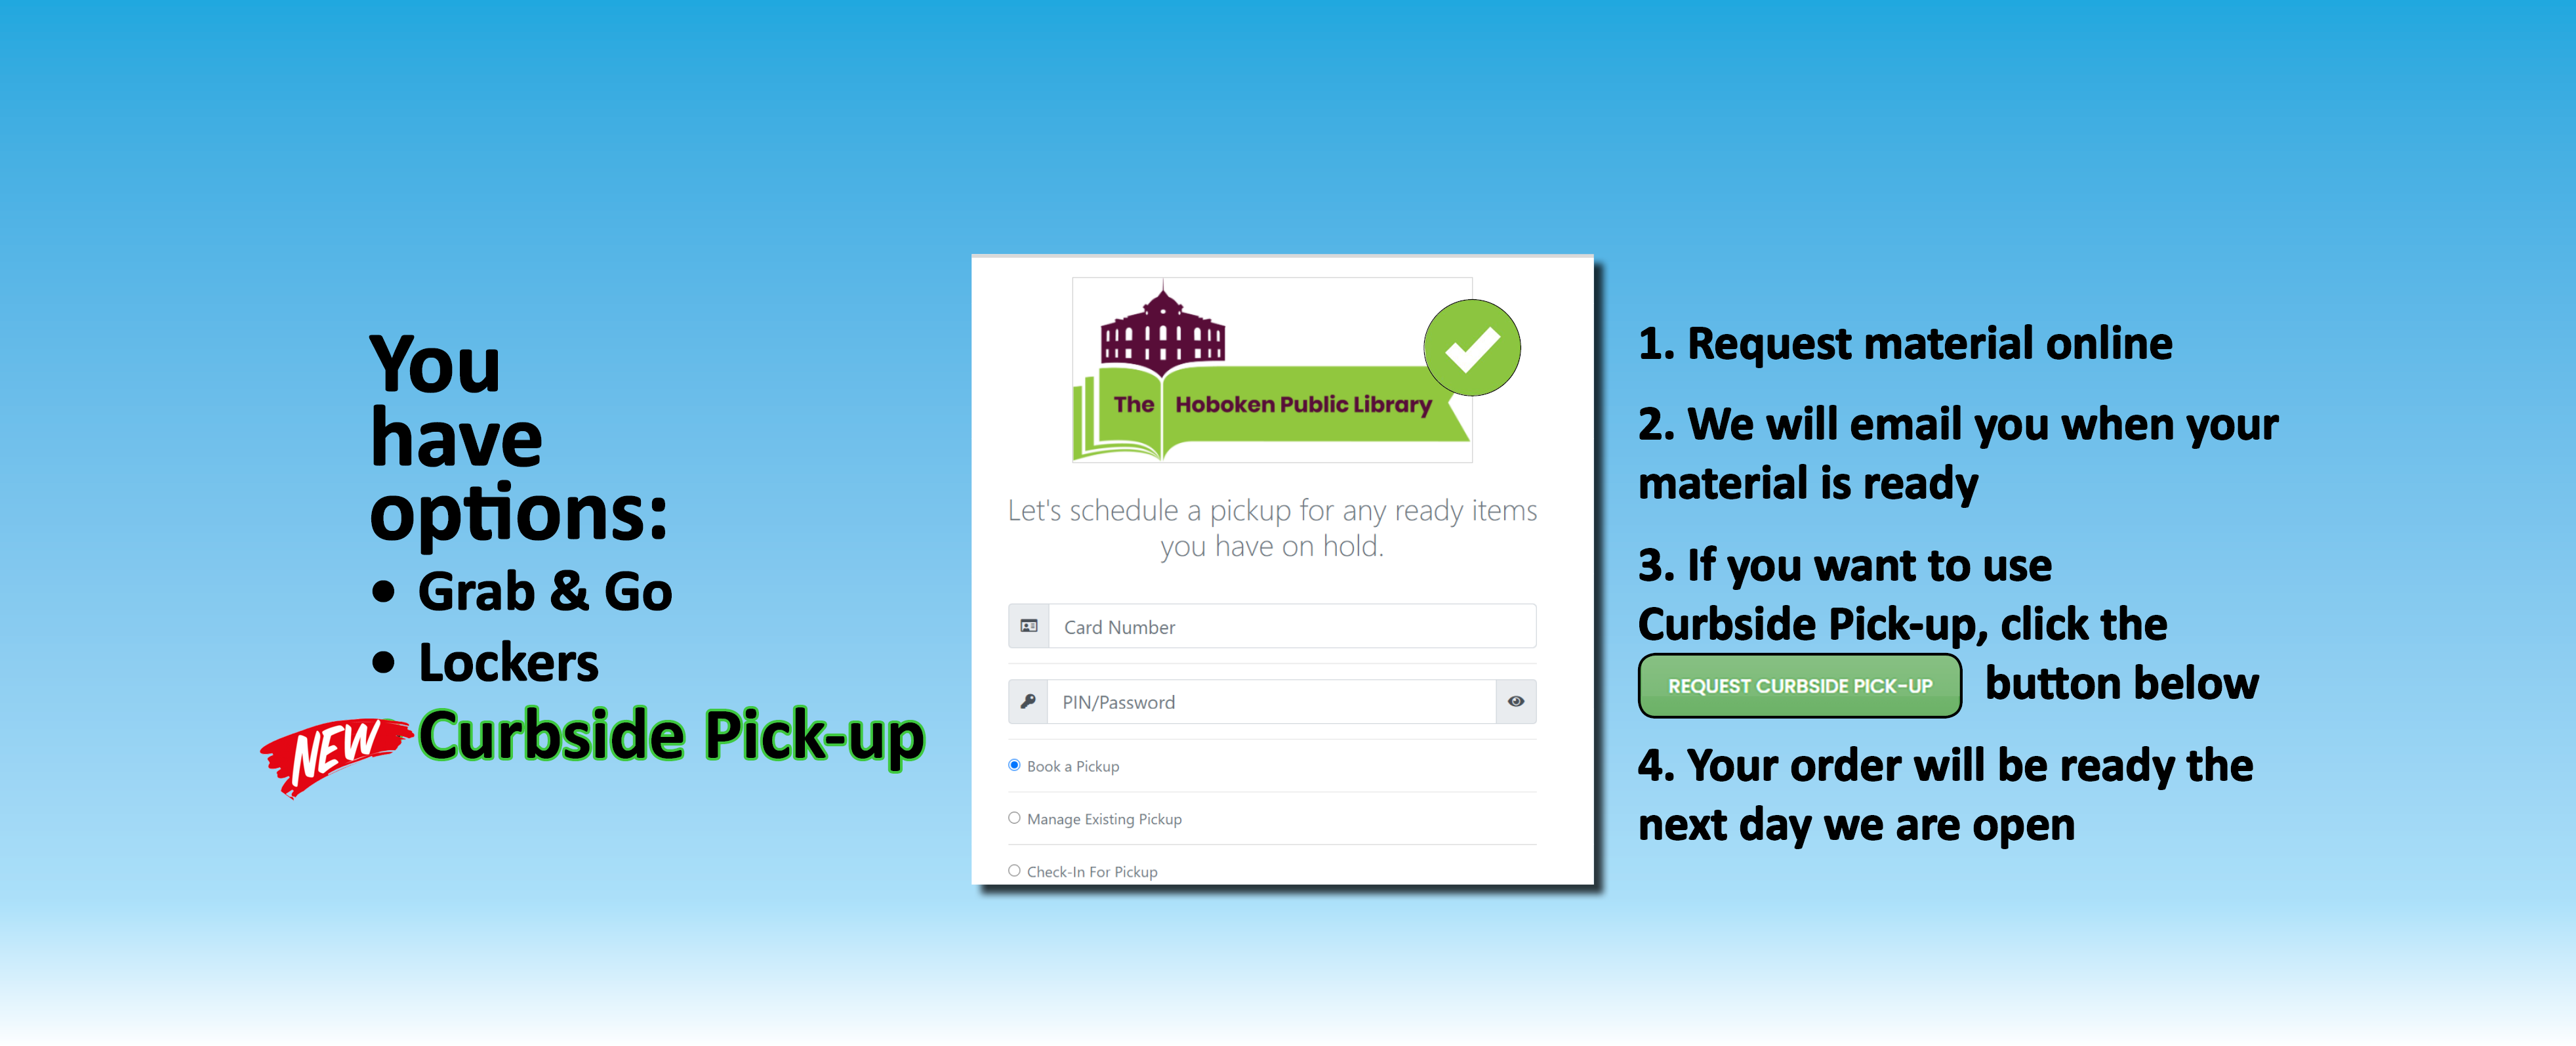 You have options: Grab and Go, Lockers, and now Curbside Pickup!